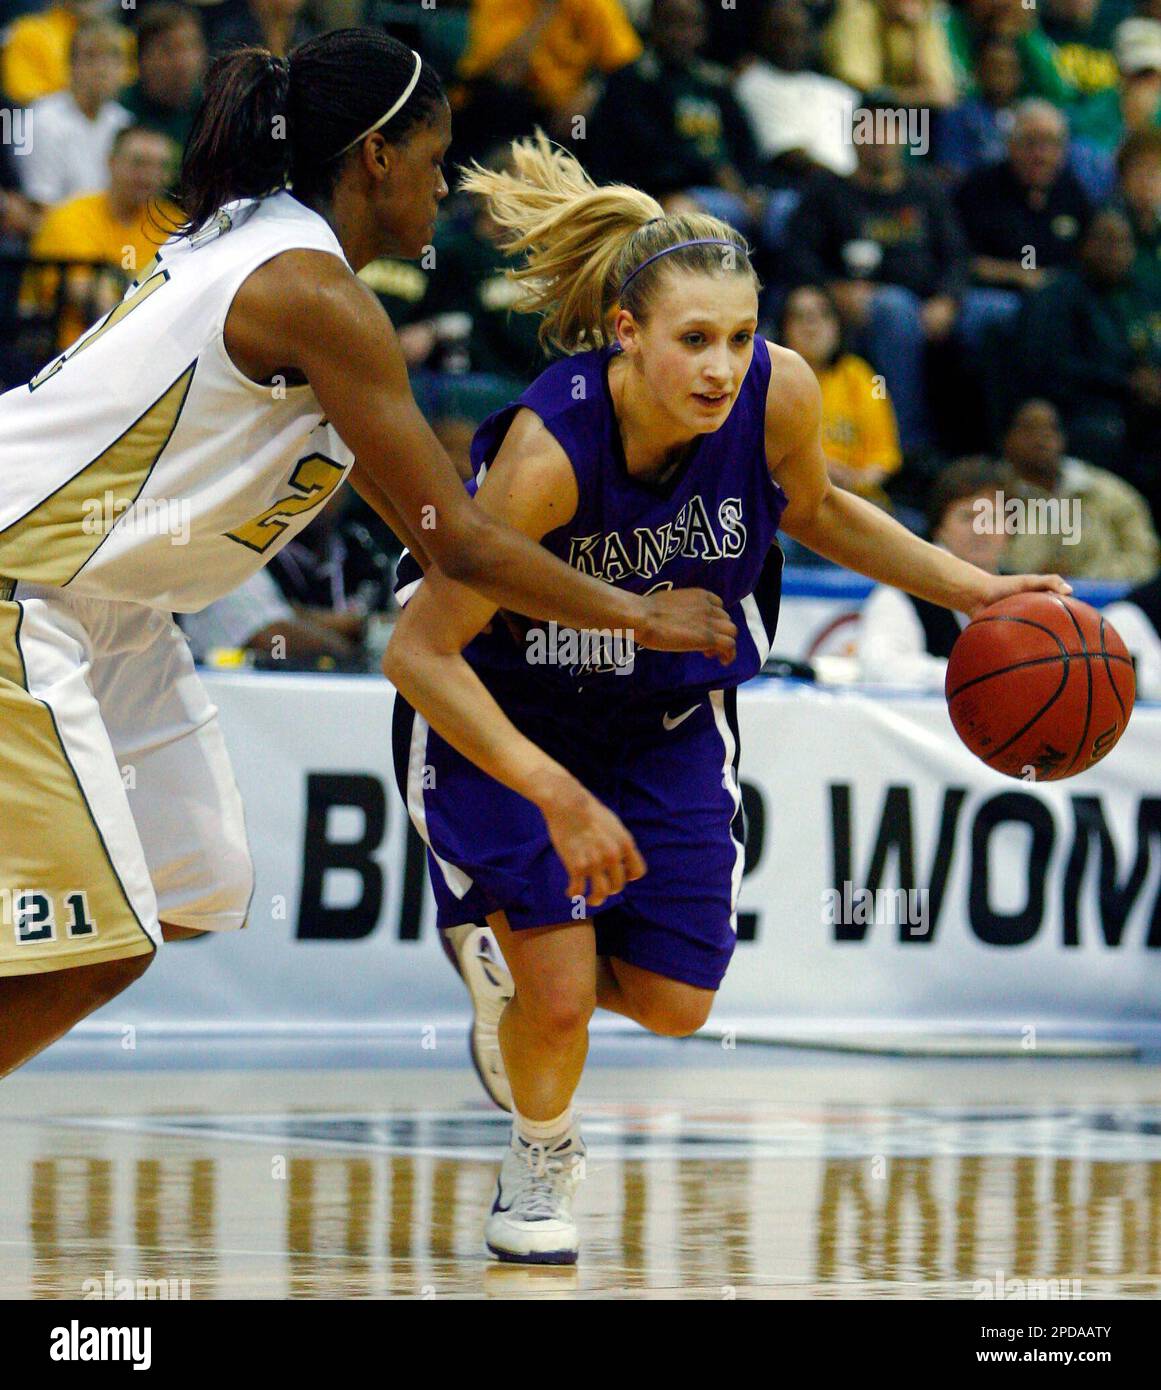 Kansas State guard Claire Coggins, right, drives around Baylor guard Chameka Scott in the second half of their Big 12 Women's Championship tournament basketball game, Wednesday, March 8, 2006, in Dallas. Baylor won 79-74 in overtime. (AP Photo/Matt Slocum) Stock Photo